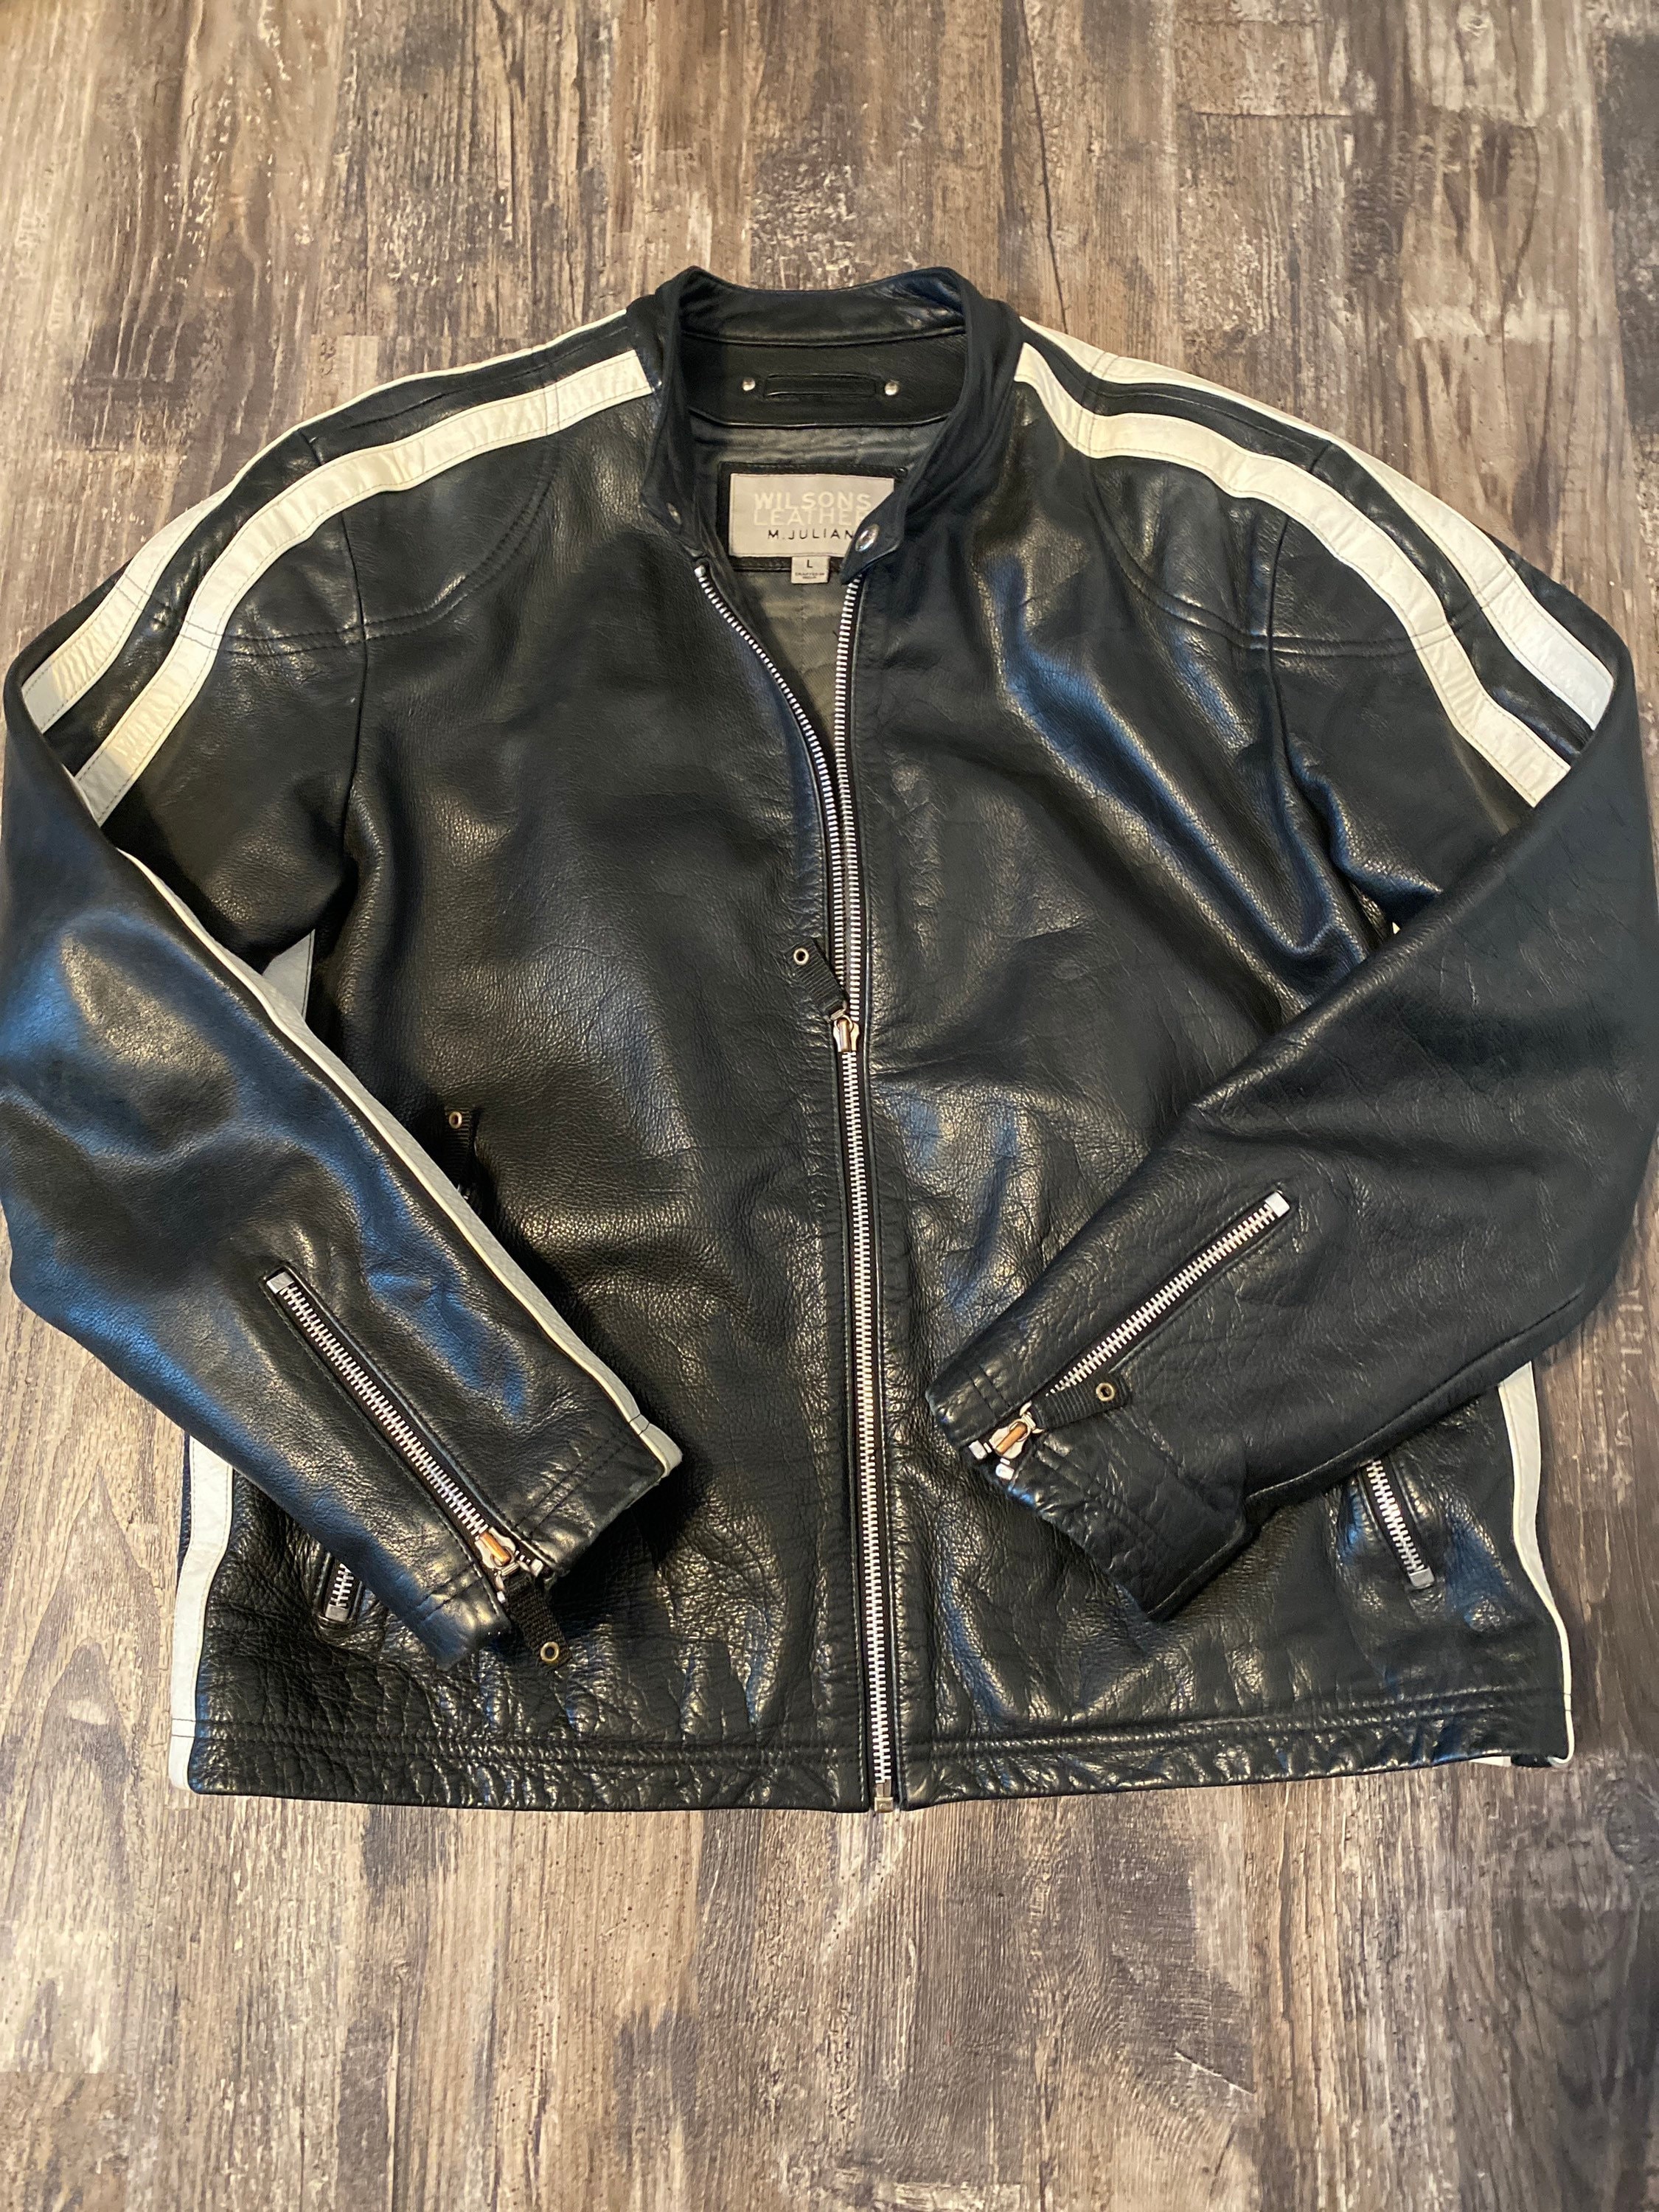 Wilsons Leather Women's Convertible Collar Leather Jacket